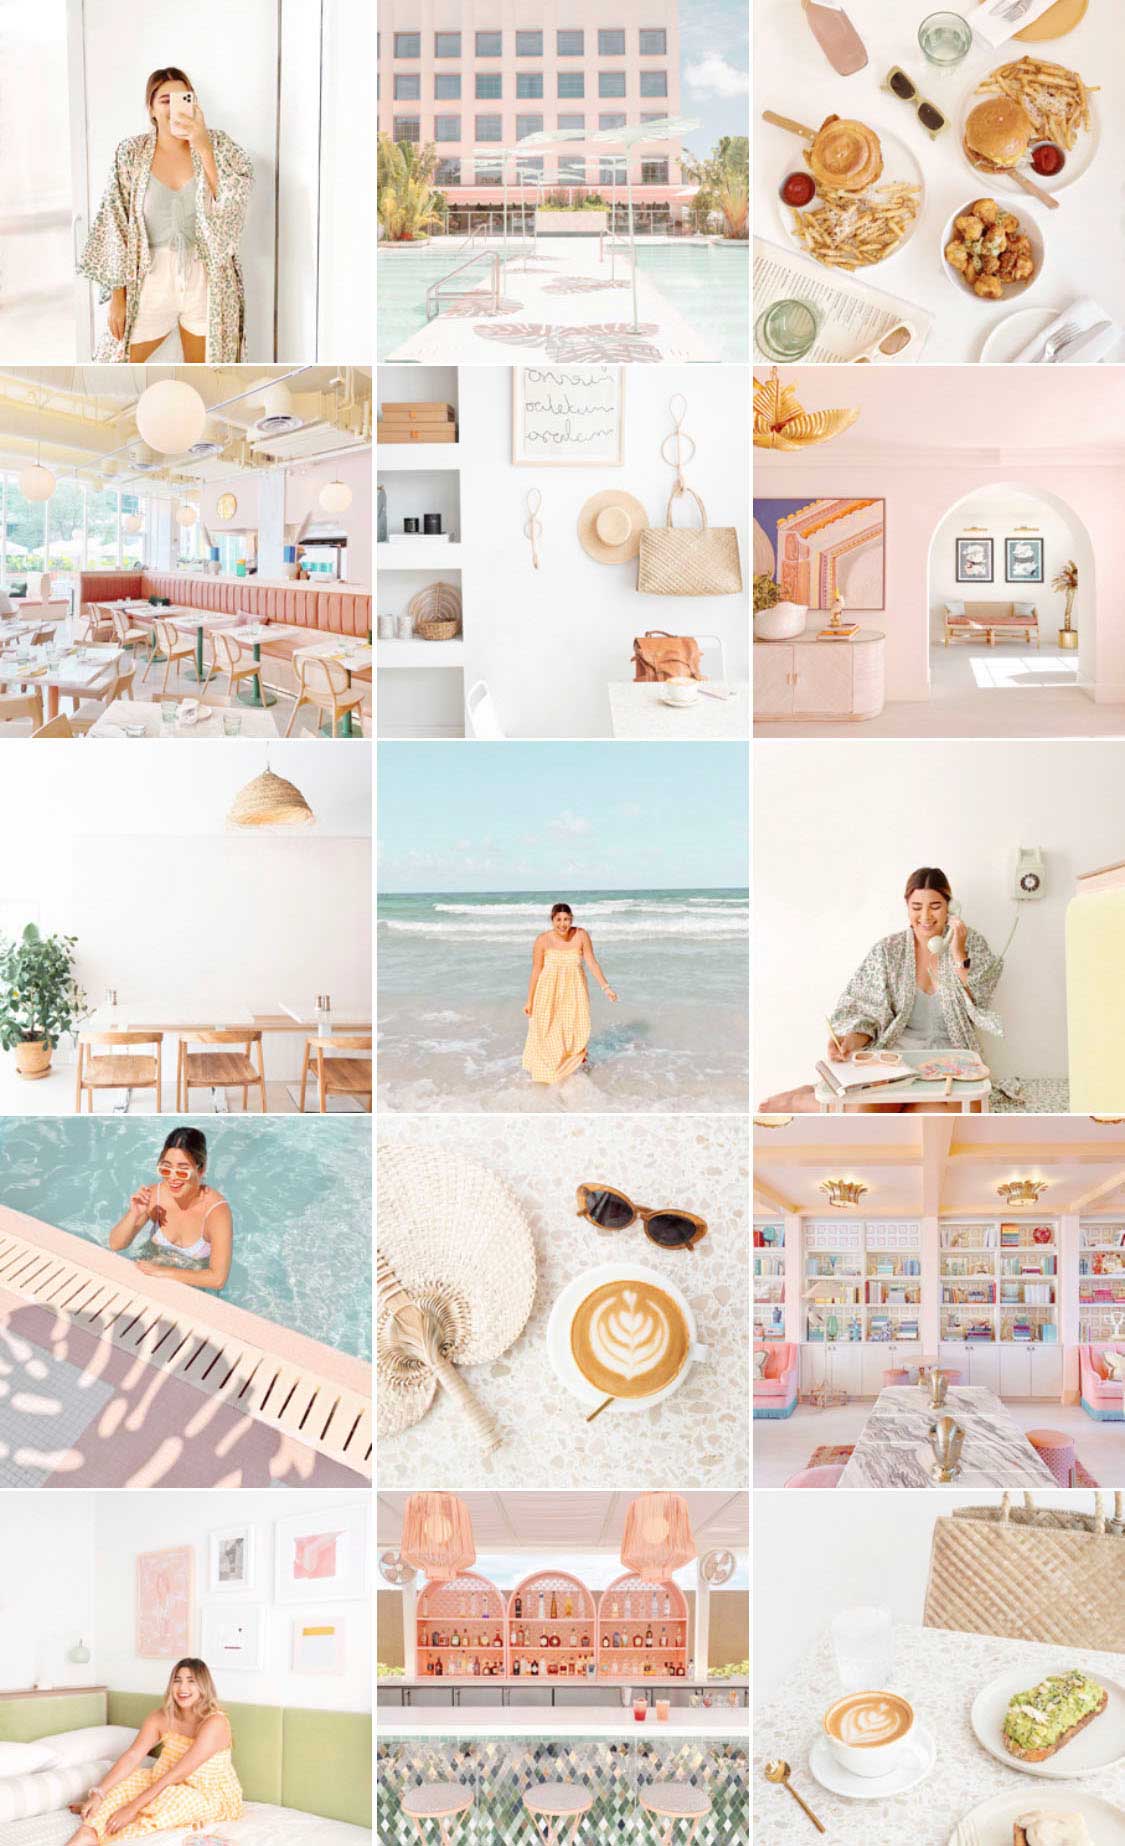 How to build your Instagram Aesthetic!